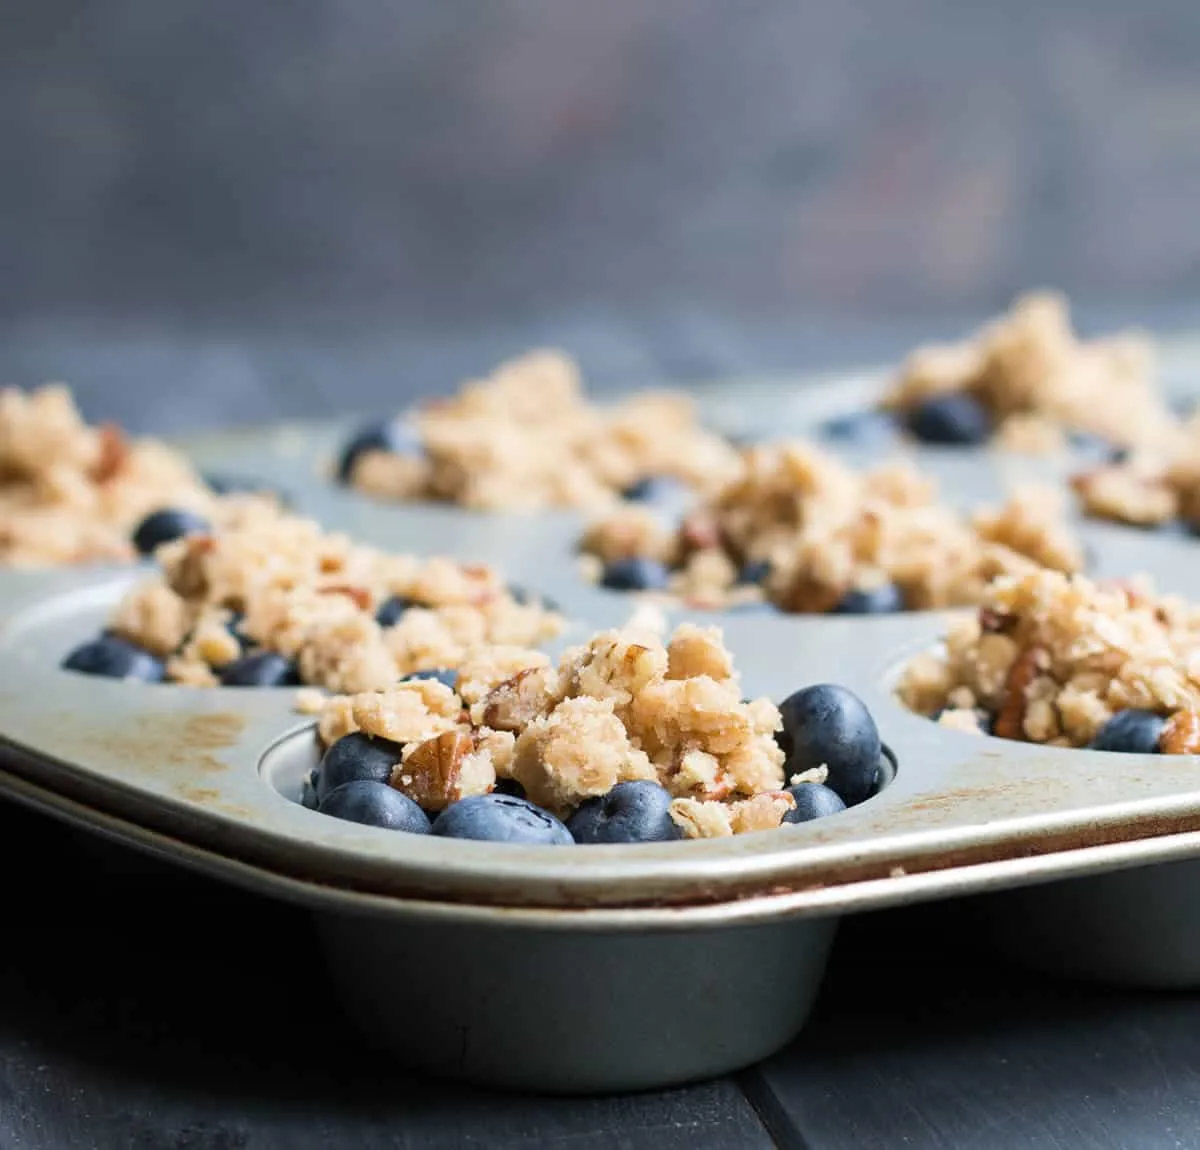 Blueberry Pie Baked Oatmeal. A pile of fresh blueberries and buttery crumb topping create a delicious fruity pie layer on top of hearty baked oatmeal.